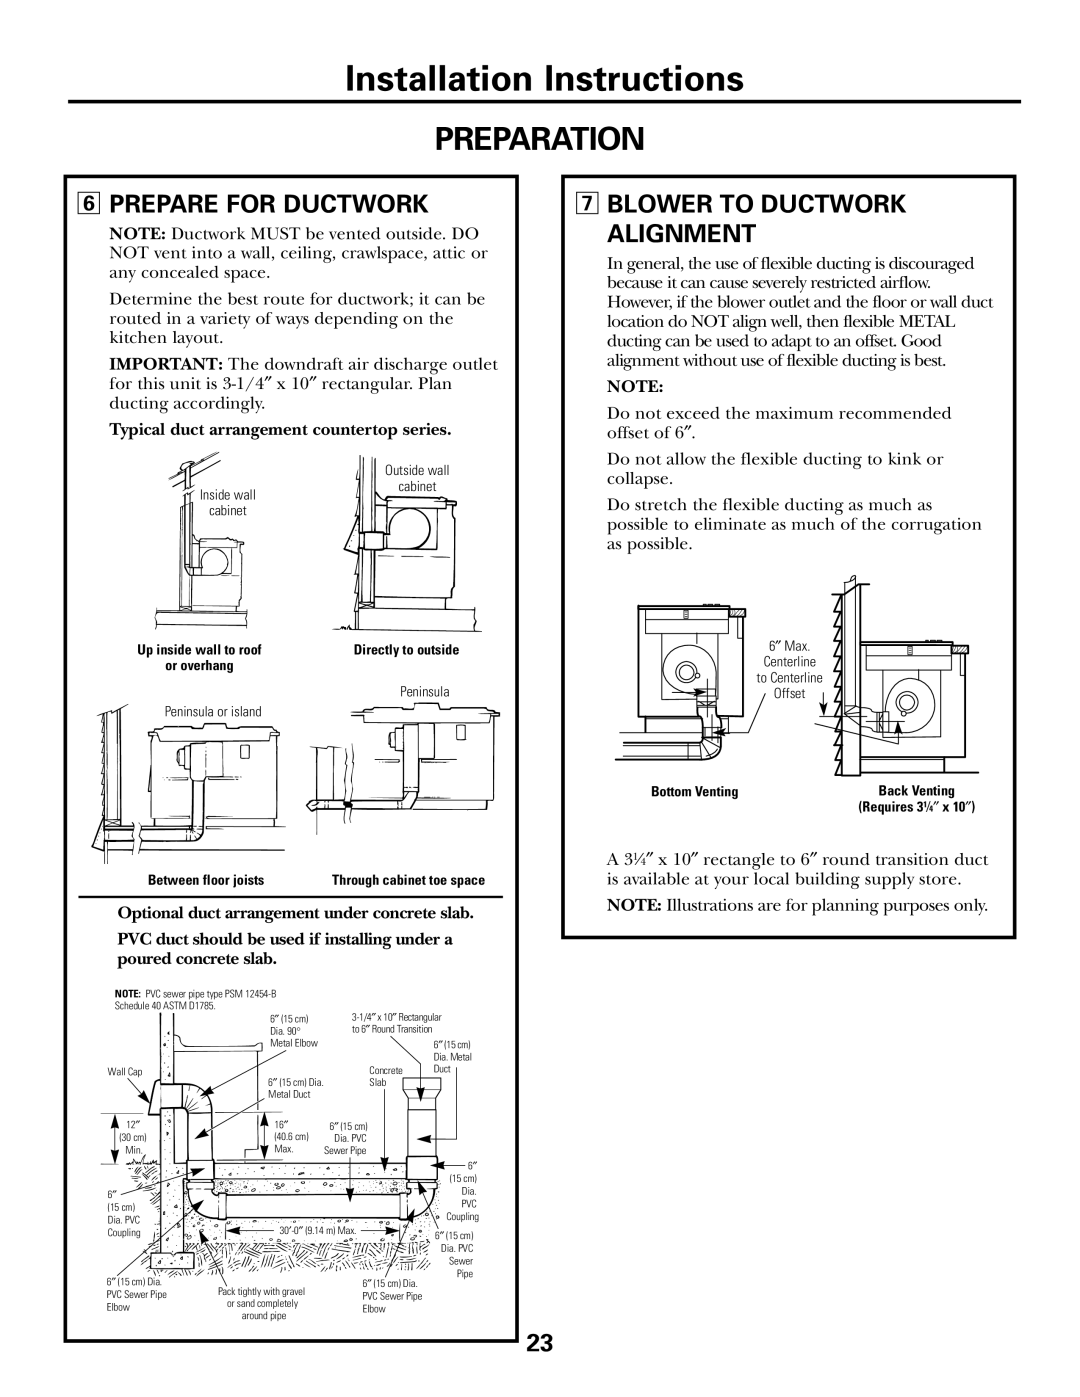 GE JGP990 manual Installation Instructions, Preparation, 6PREPARE FOR DUCTWORK, 7BLOWER TO DUCTWORK ALIGNMENT 